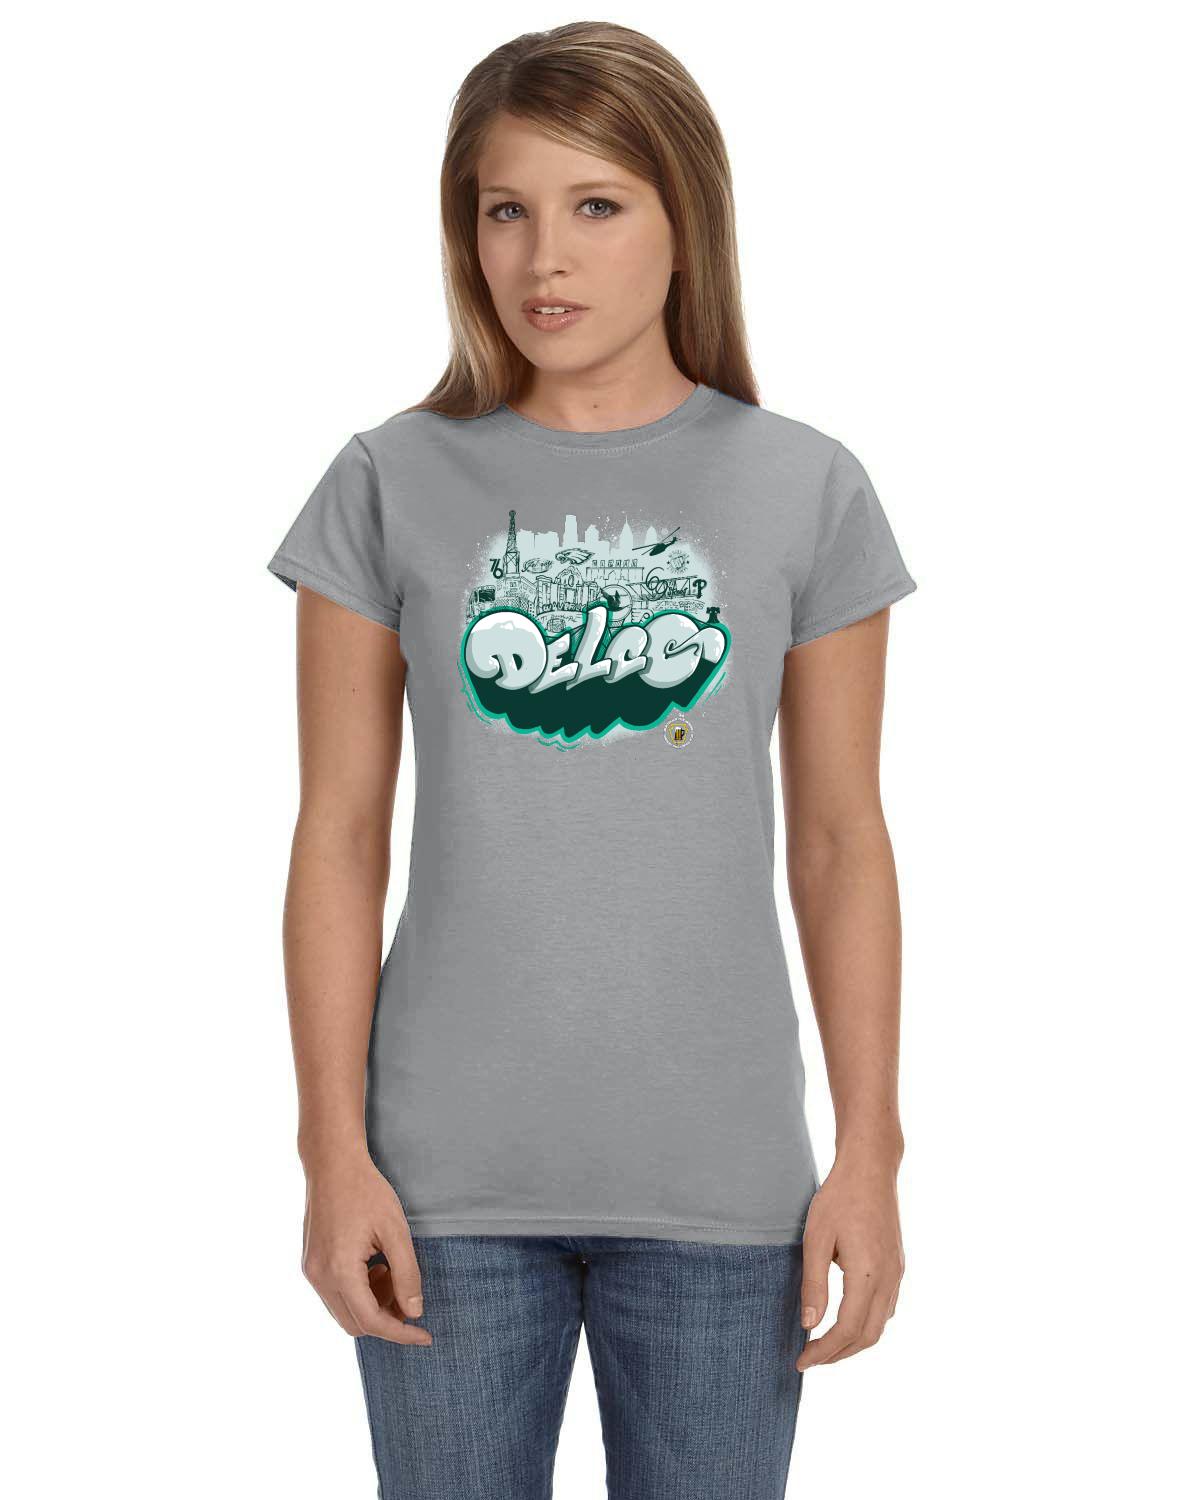 Delco Tailgate Tour Gildan Ladies' Softstyle 7.5 oz./lin. yd. Fitted T-Shirt | G640L